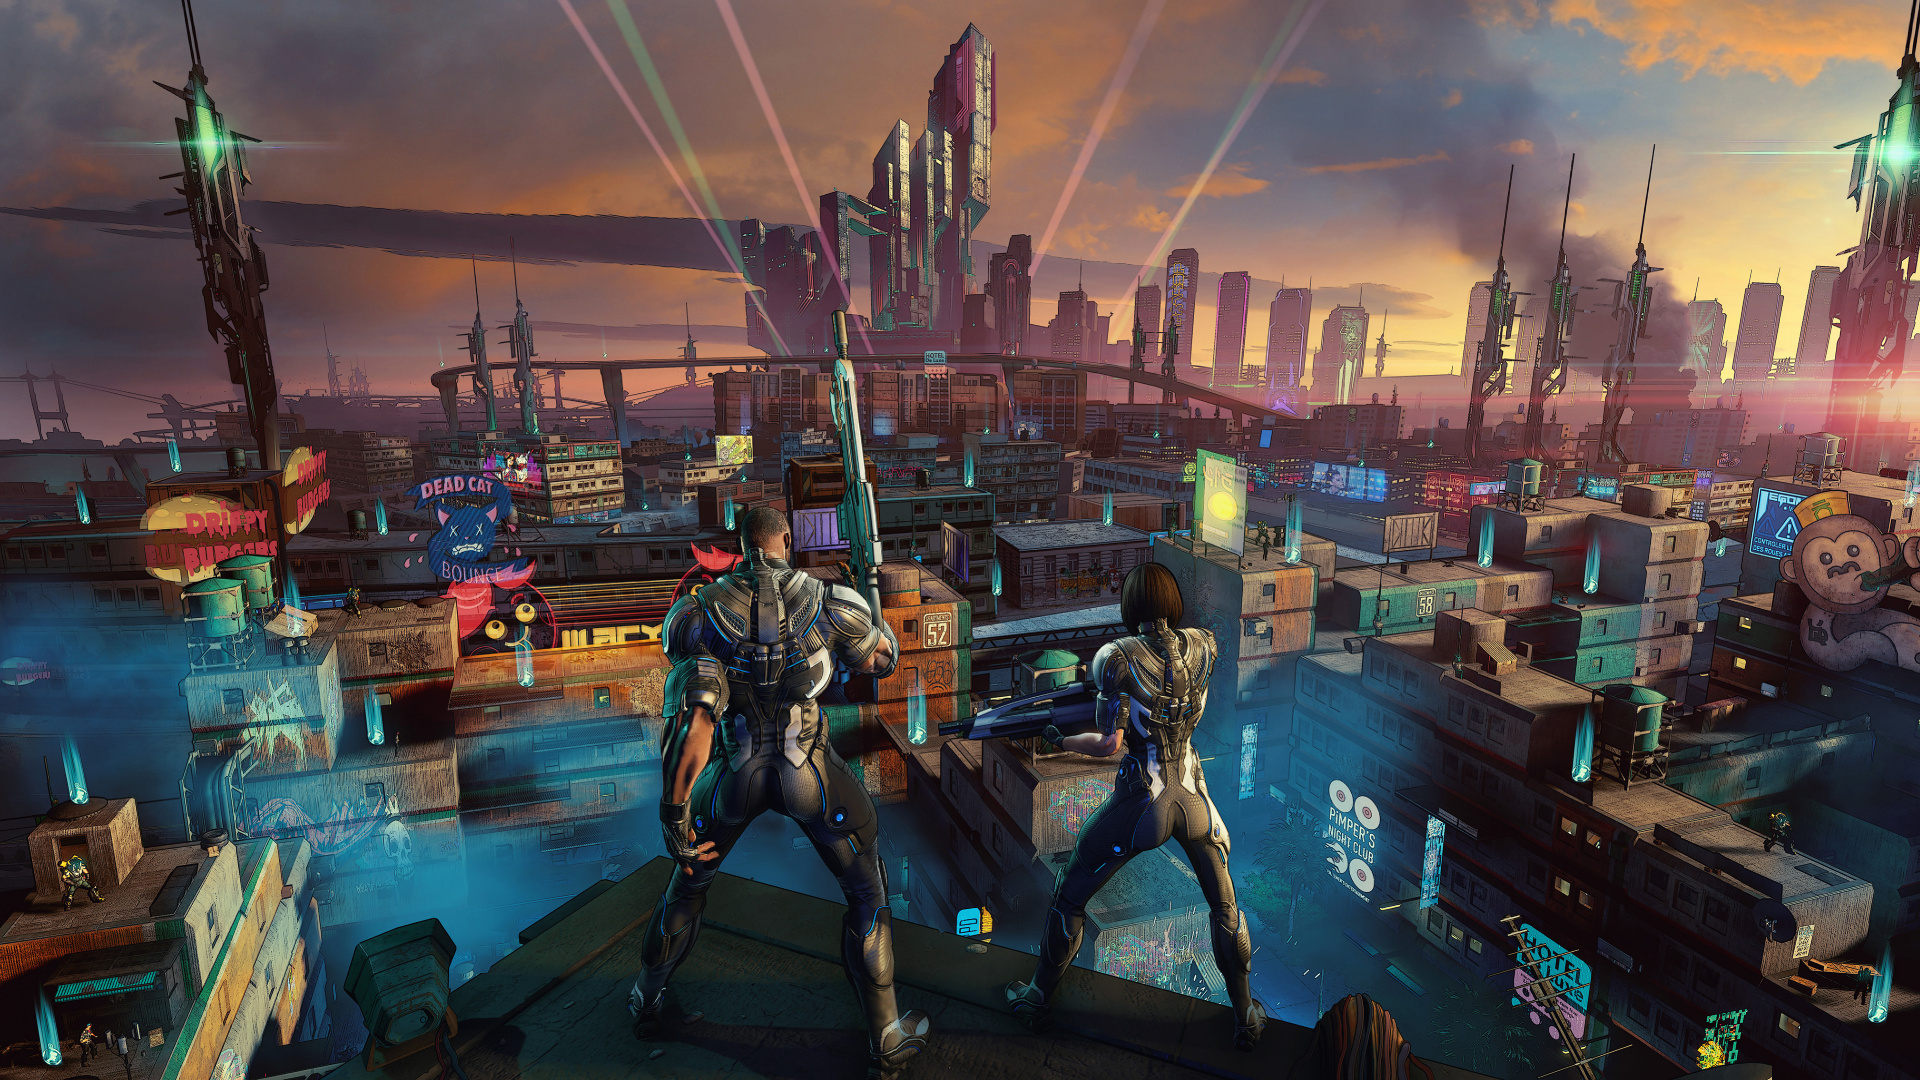 Crackdown 3, Xbox Game Studios, pc Game, Games, Strategy Video Game. Wallpaper in 1920x1080 Resolution